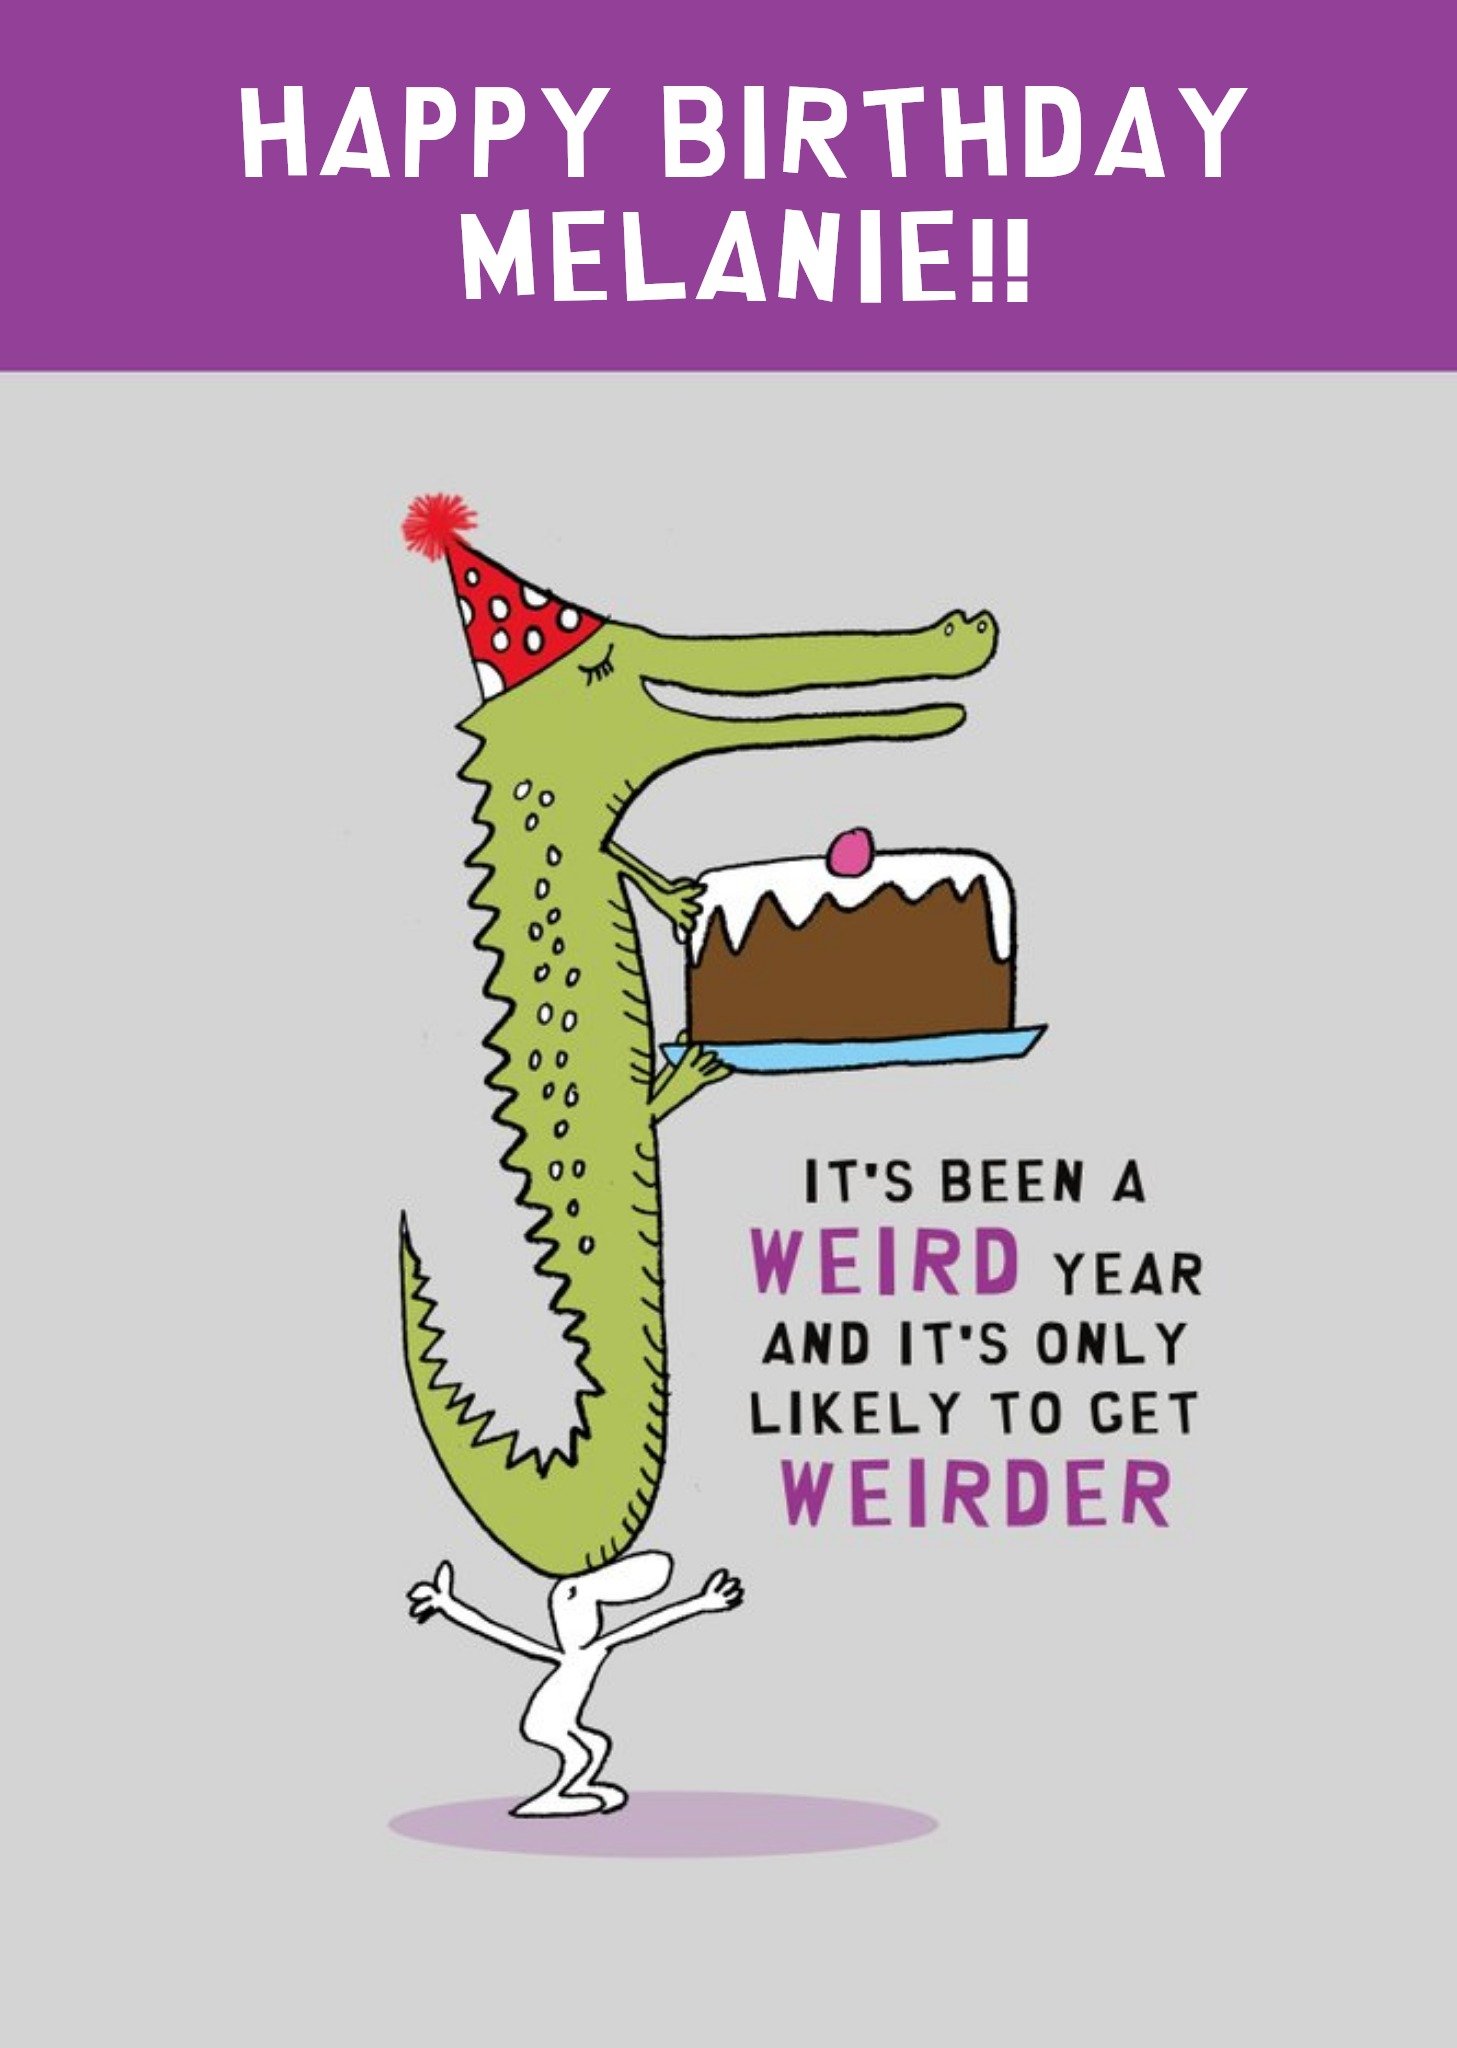 Moonpig Illustration Of A Character Balancing A Crocodile Holding A Cake On His Head Birthday Card E